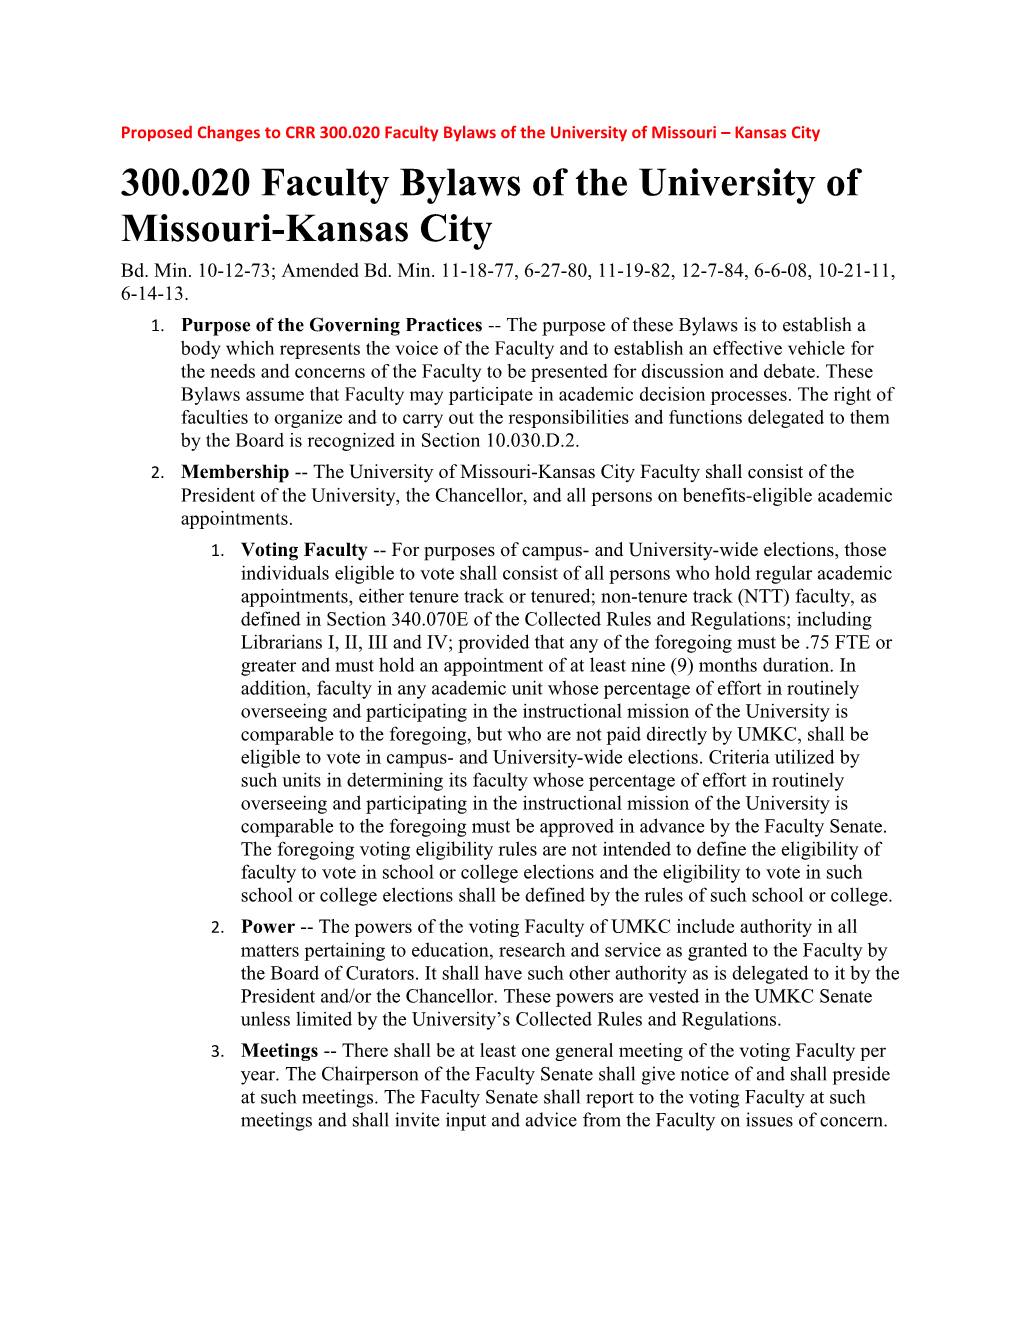 Proposed Changes to CRR 300.020 Faculty Bylaws of the University of Missouri Kansas City